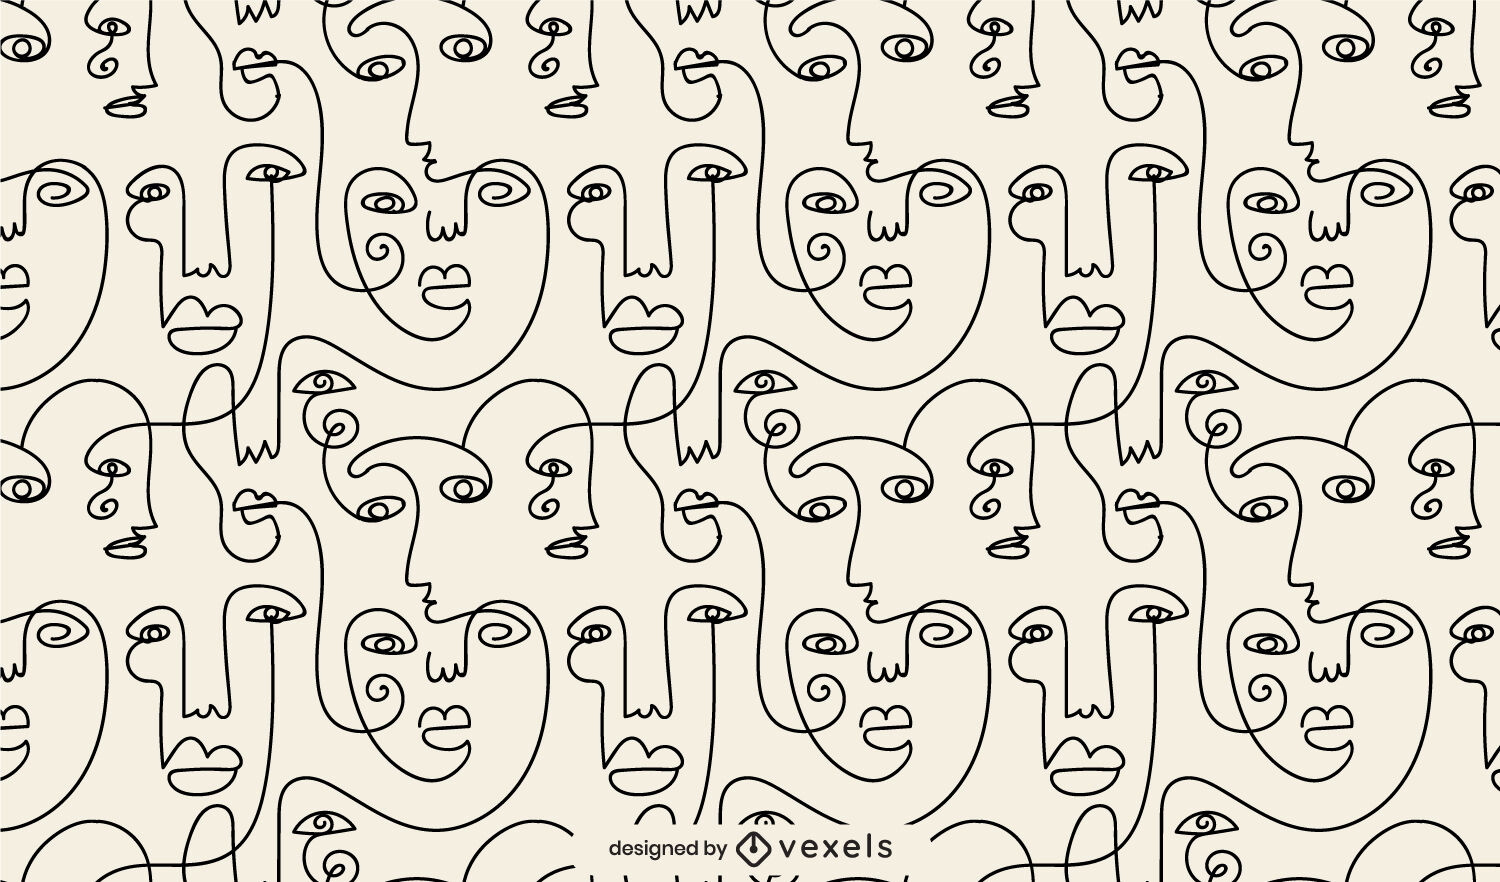 Abstract human faces pattern design